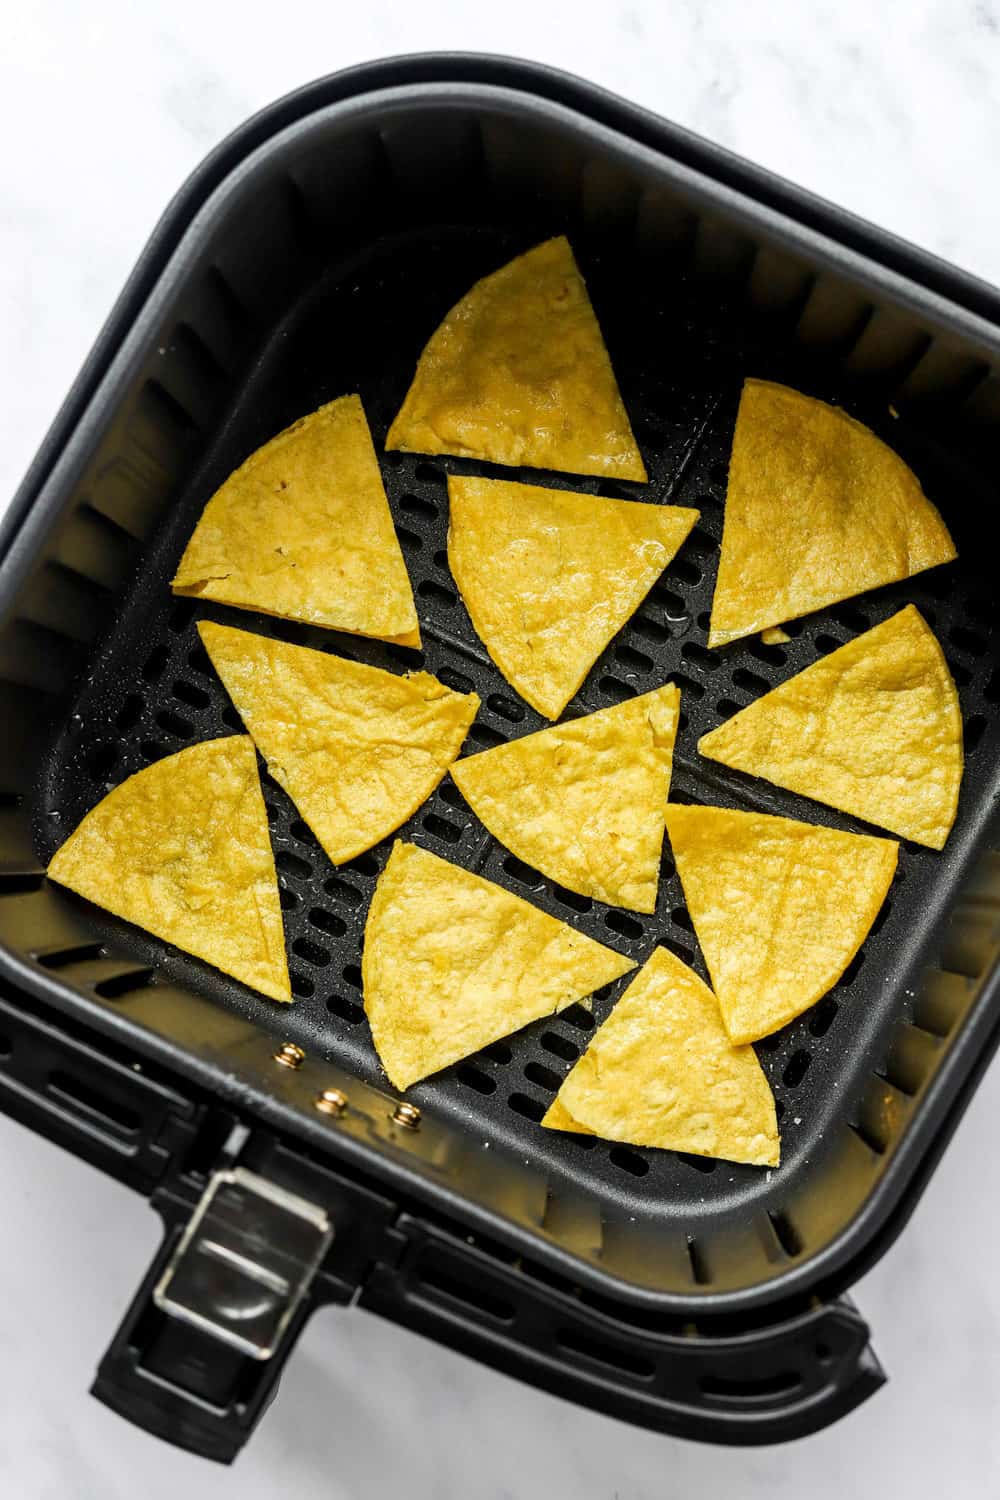 Uncooked triangle shaped tortilla pieces in a black, square air fryer basket.